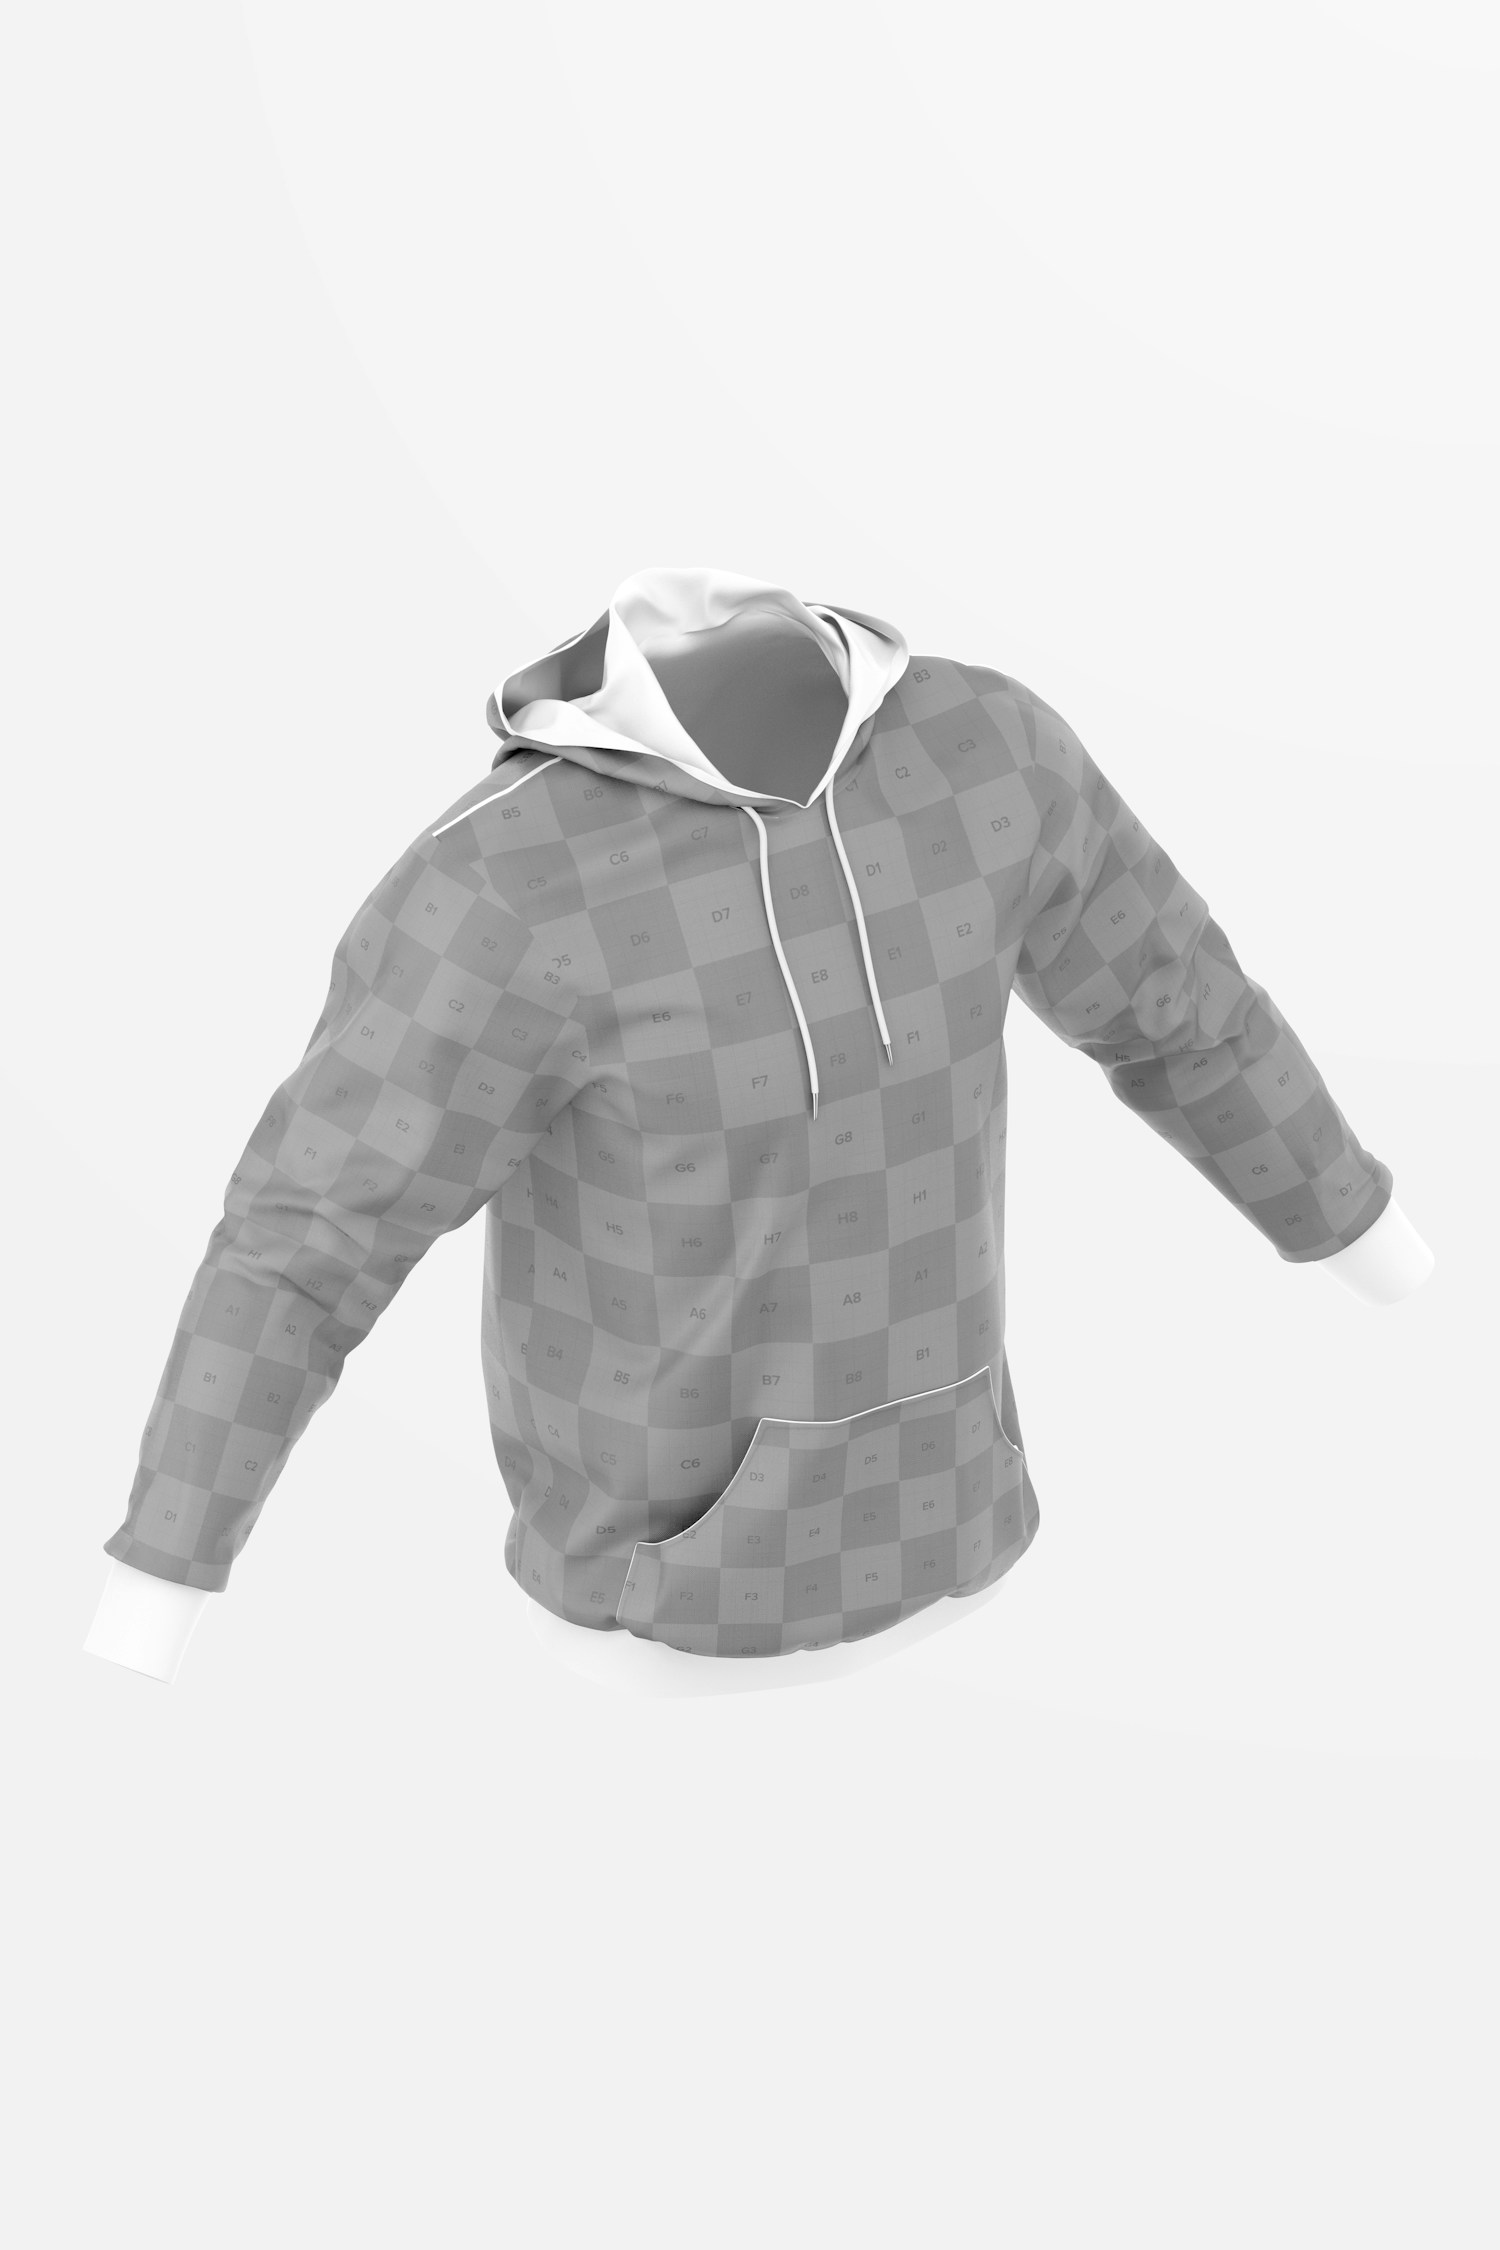 Hoodie Mockup, Isometric Right View